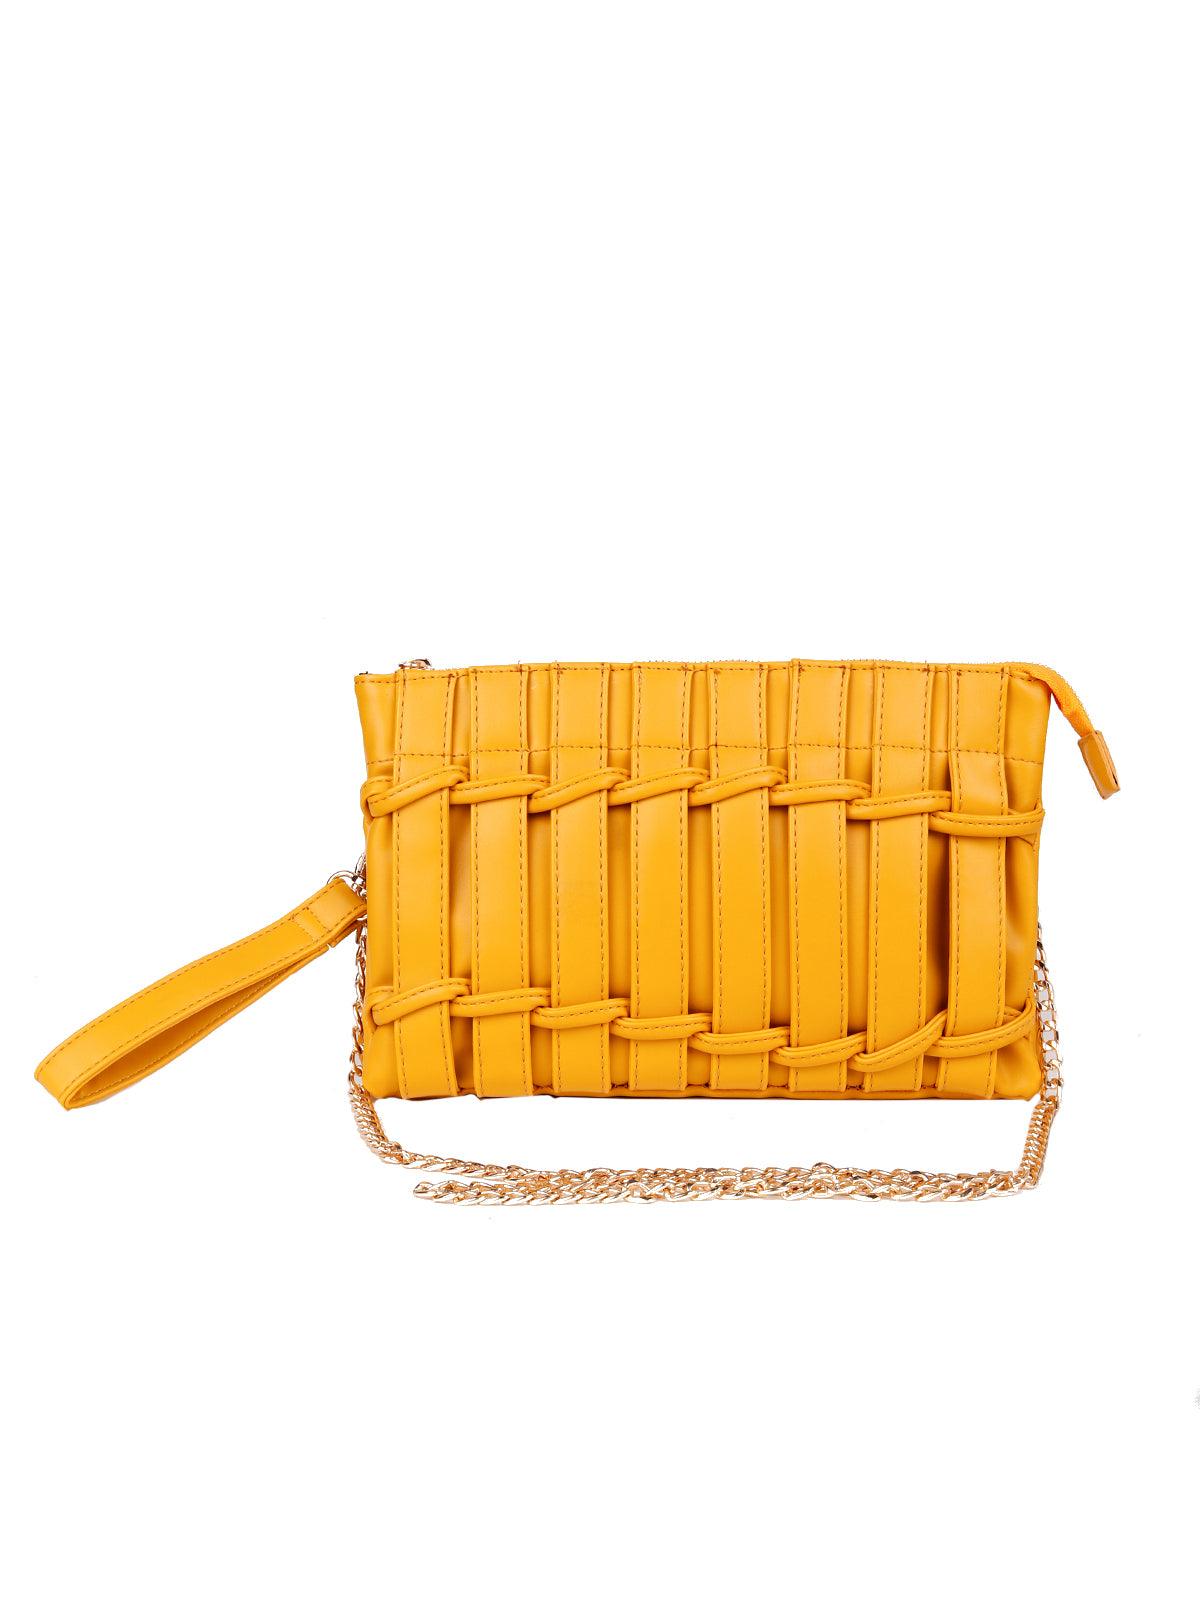 Bright mustard yellow textured sling bag - Odette